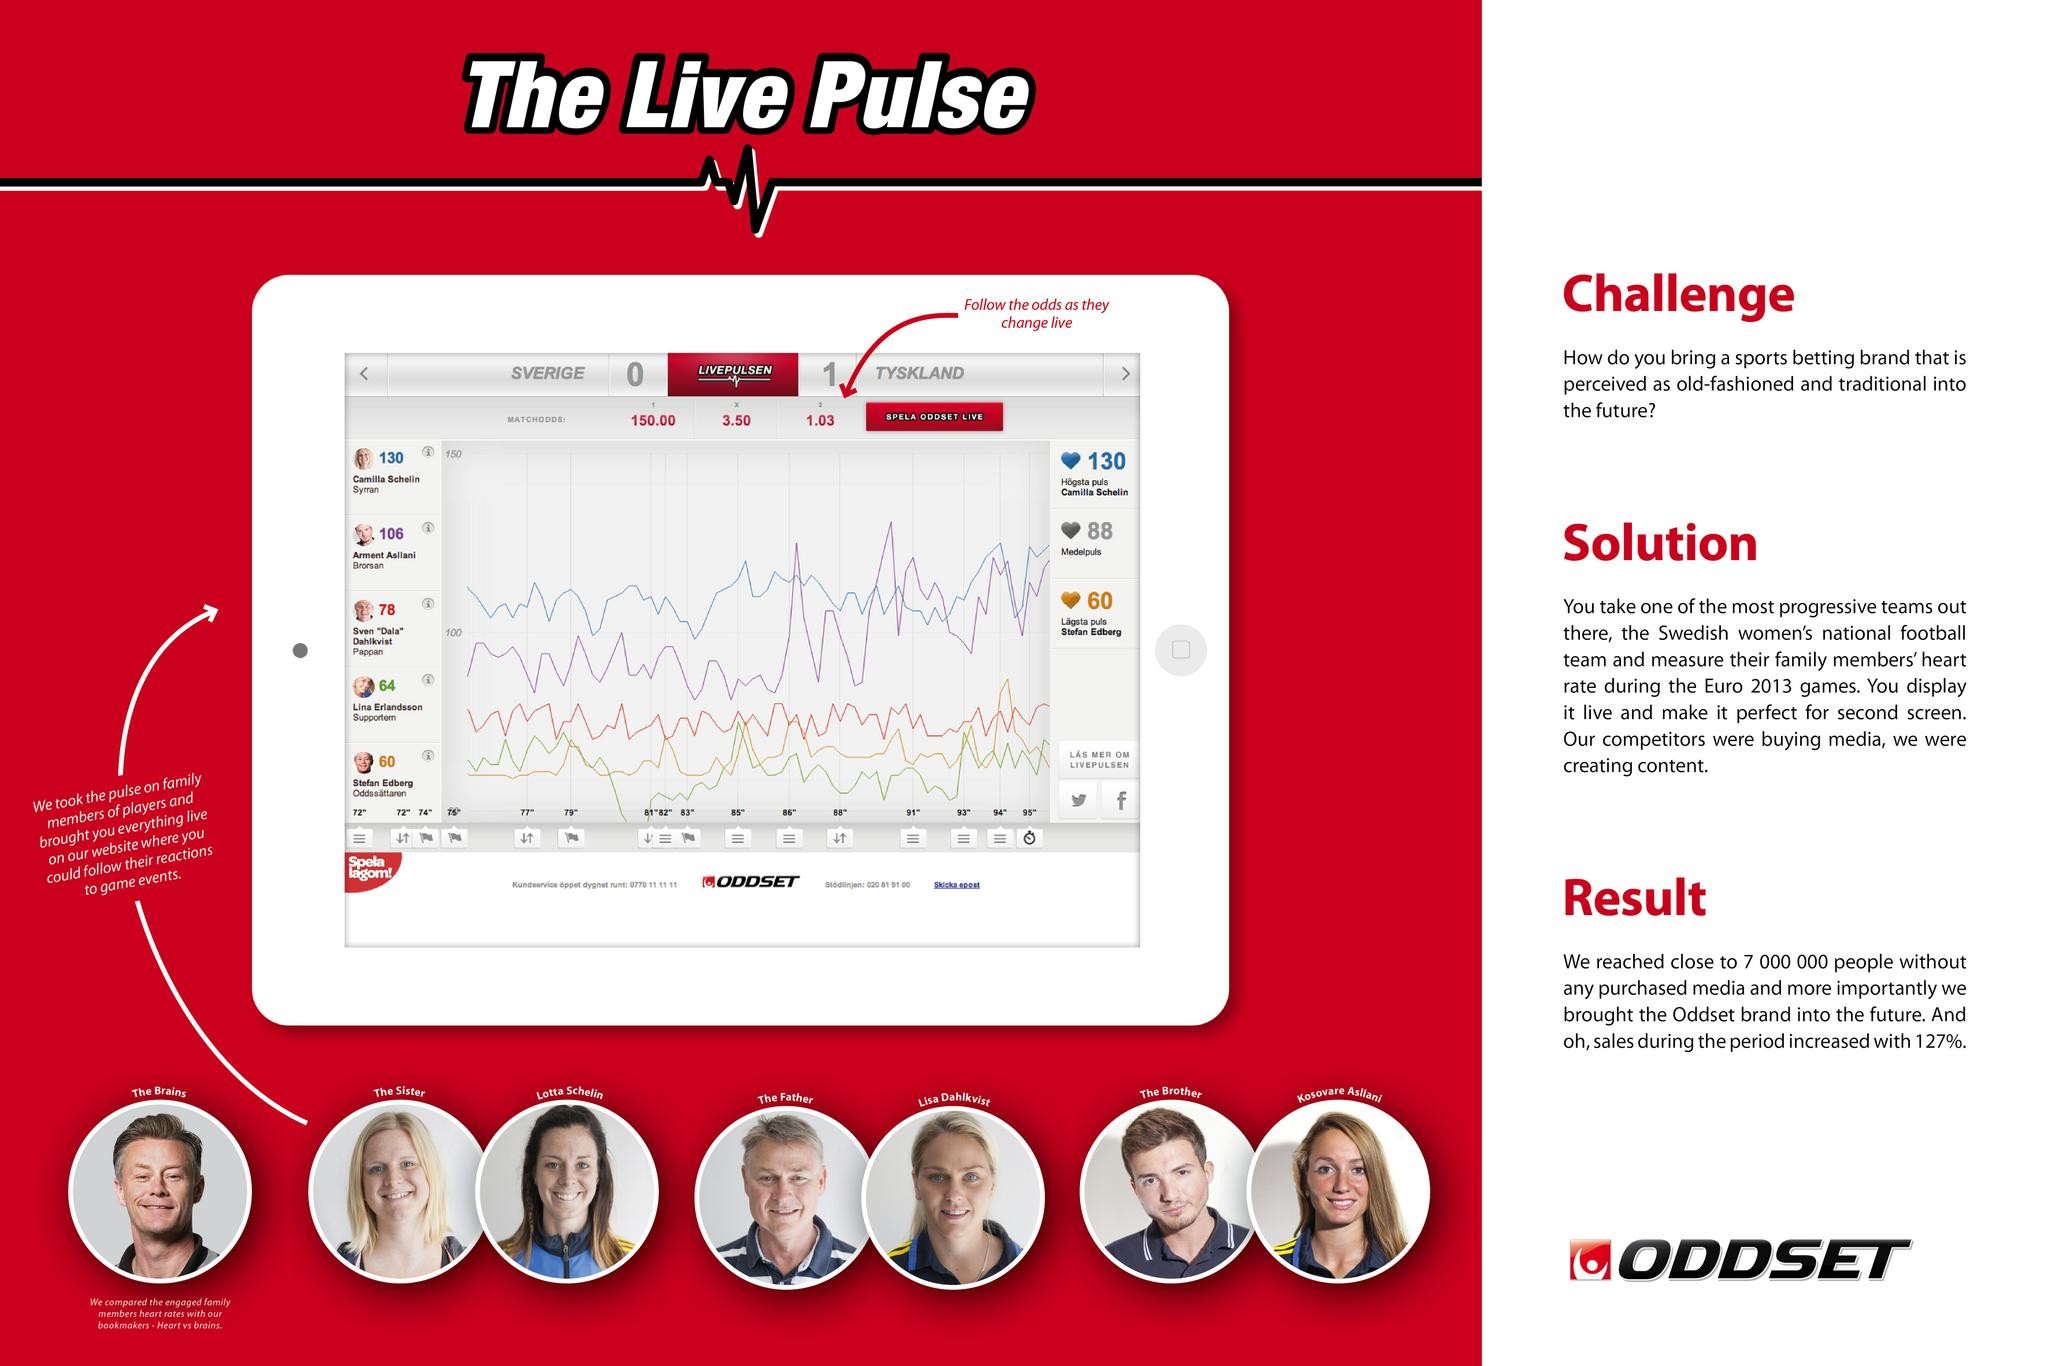 THE LIVE PULSE